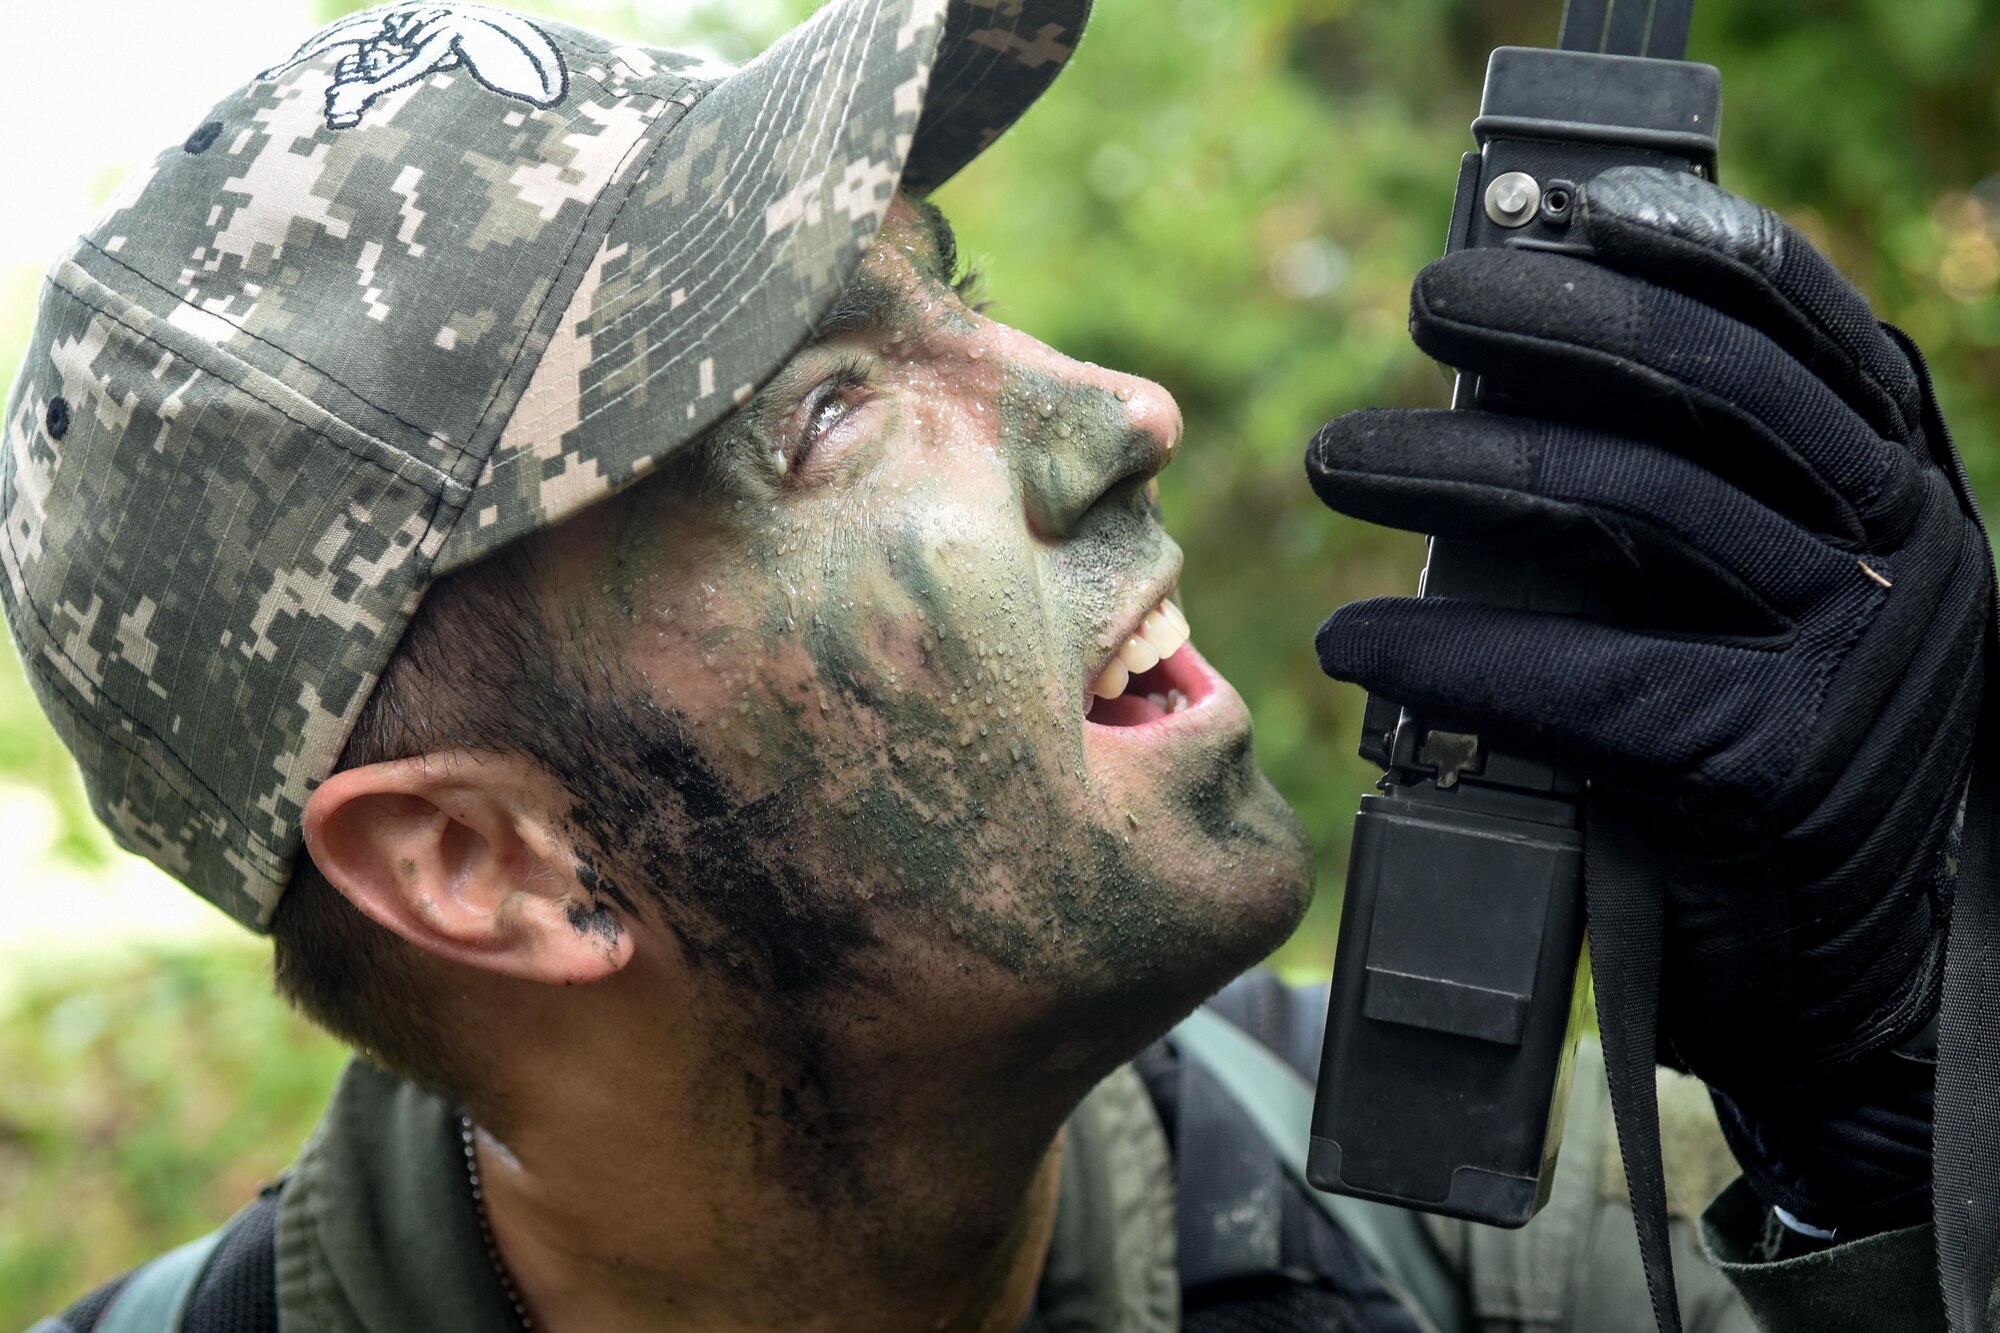 First Lt. James Hendershaw, 336th Fighter Squadron weapon systems officer, uses his combat survival evader locator to try and make contact an allied aircraft during the Razor Talon exercise Aug. 5, 2016, near Smyrna, North Carolina. The CSEL is used by aircrew to support survival, evasion, and personnel recovery operations and provides secure two-way communication with nearby friendly forces. (U.S. Air Force photo by Airman Shawna L. Keyes)